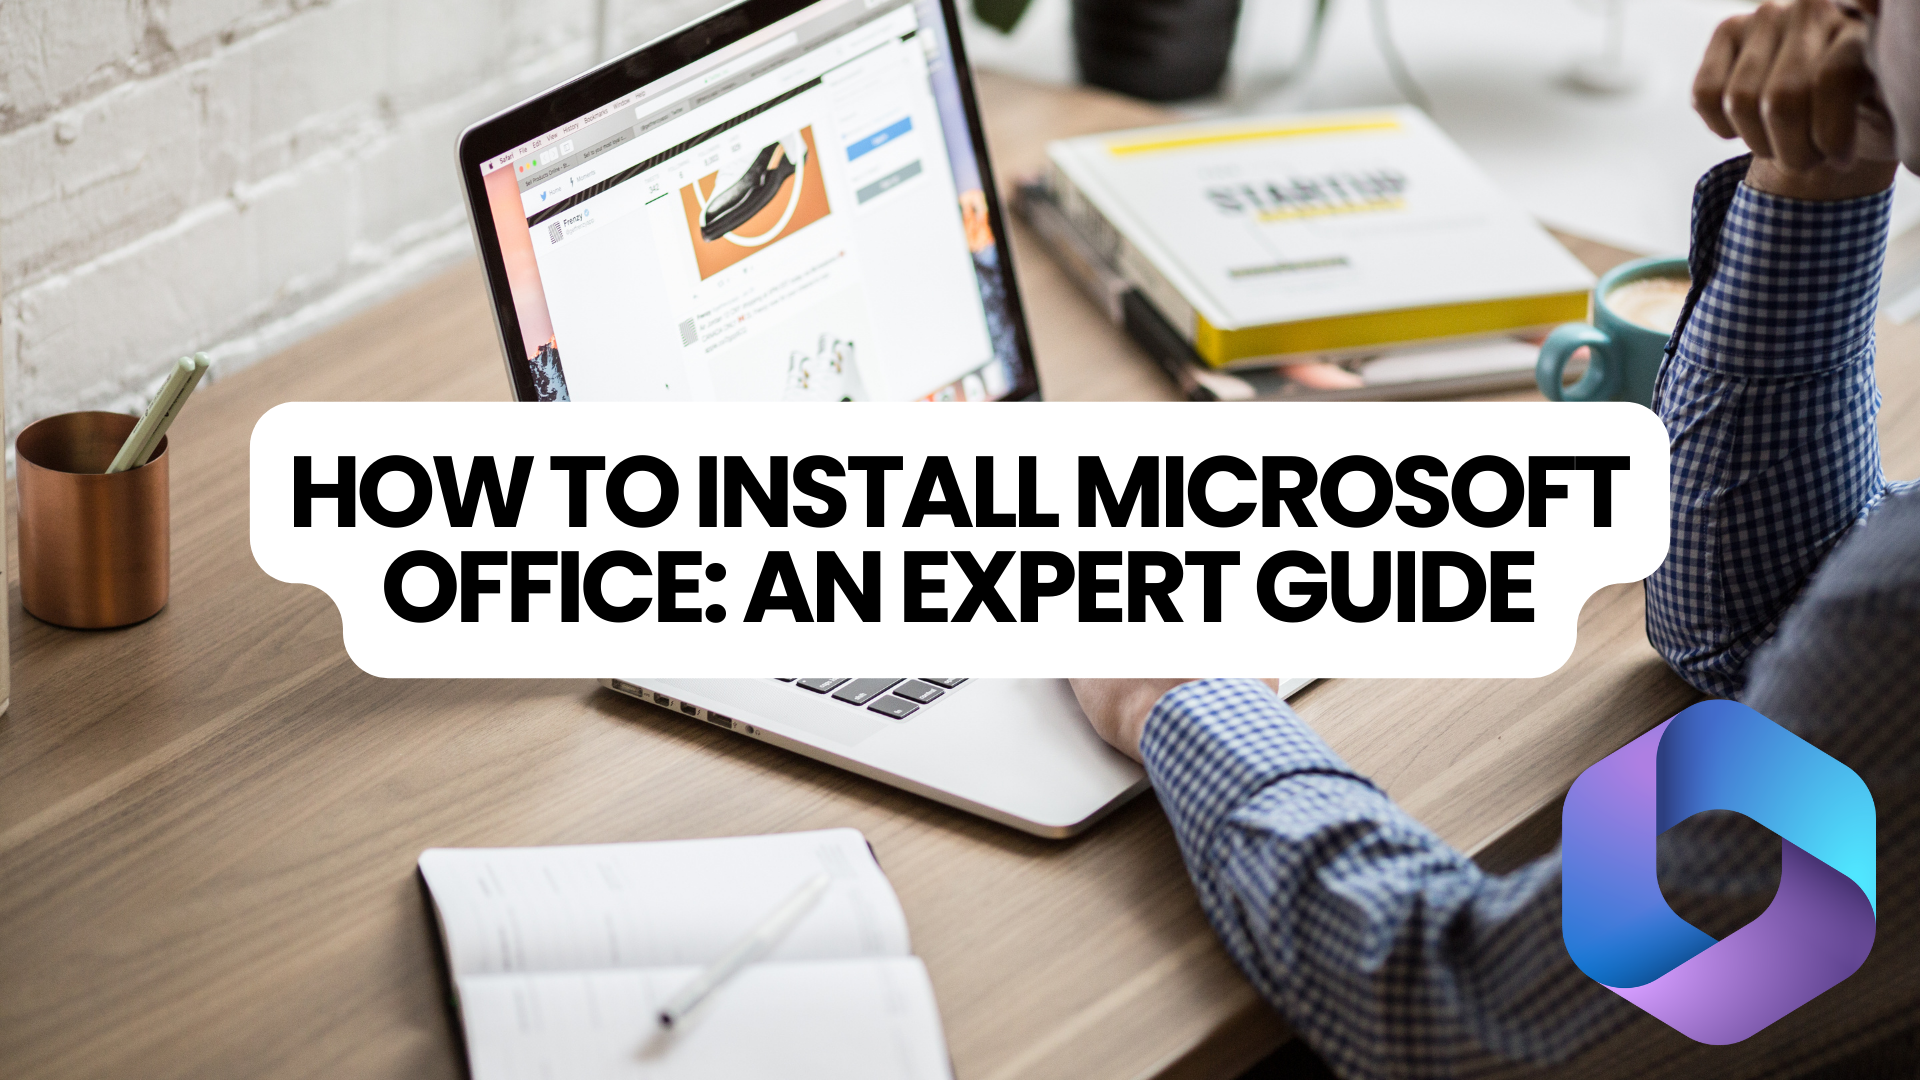 How to Install Microsoft Office Application: An Expert Guide